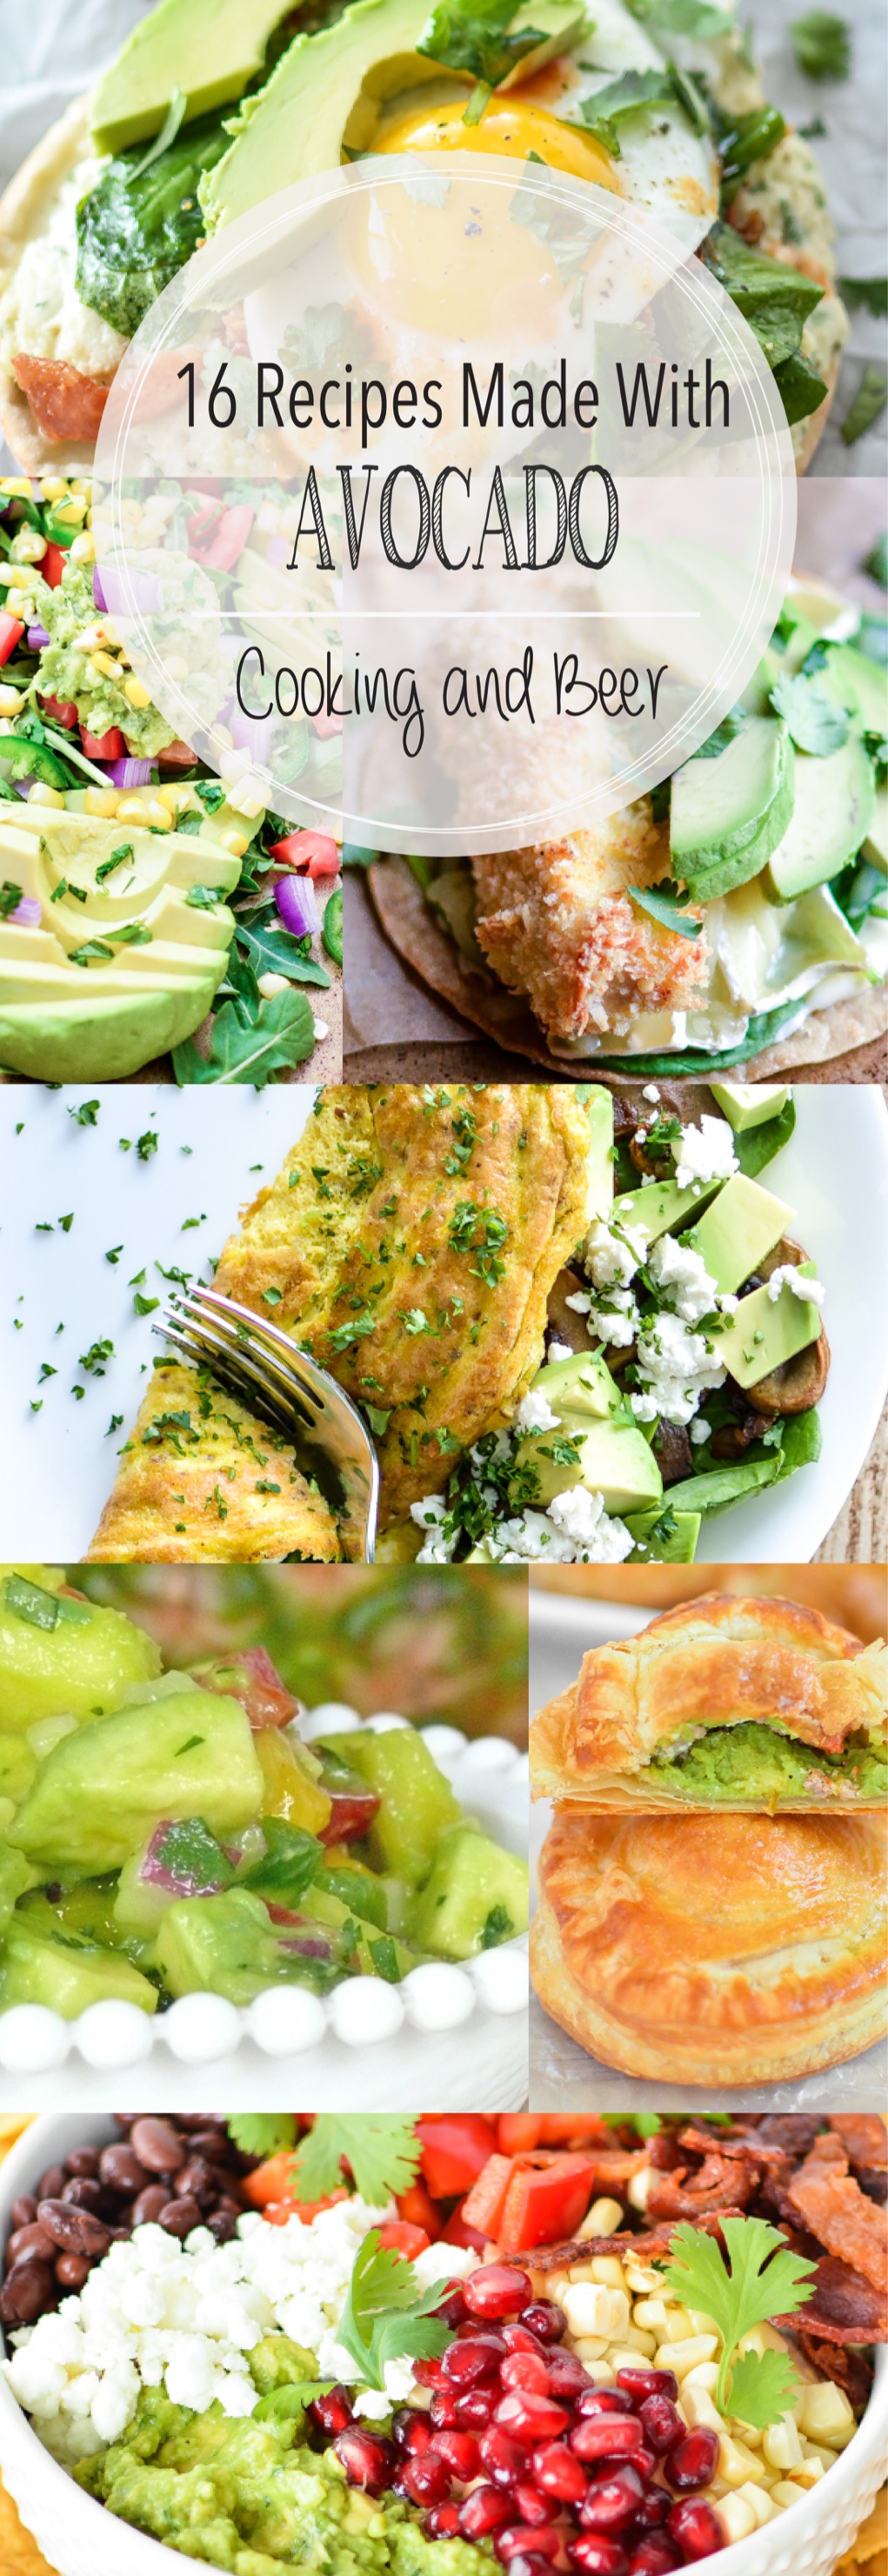 16 Recipes Made with Avocado - Cooking and BeerCooking and Beer